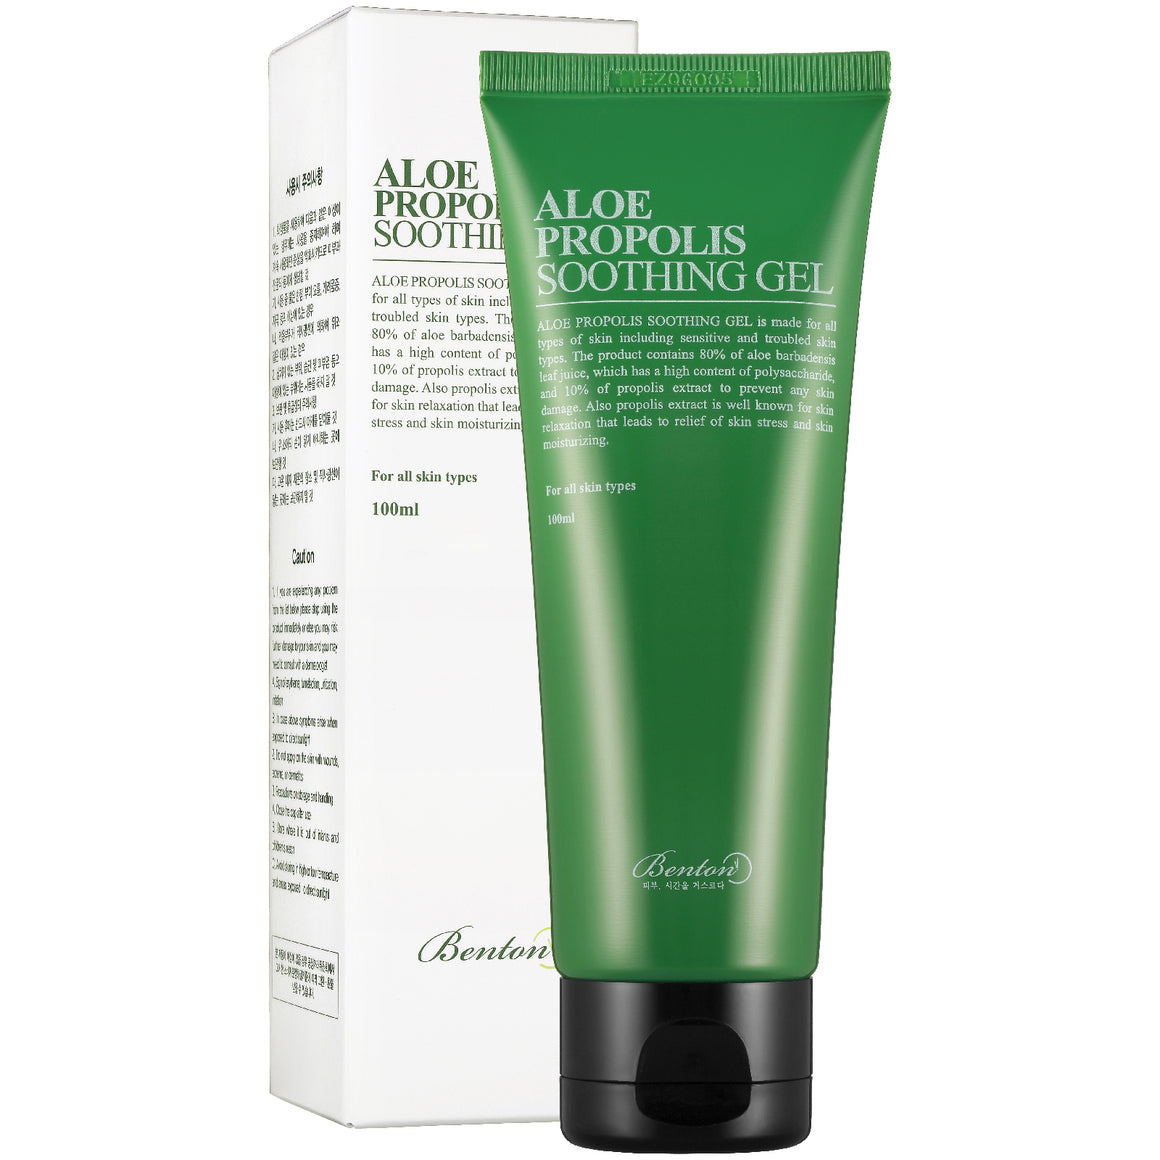 Benton Aloe Propolis Soothing Gel - 100ml - Now available on our sister website www.Barefection.com